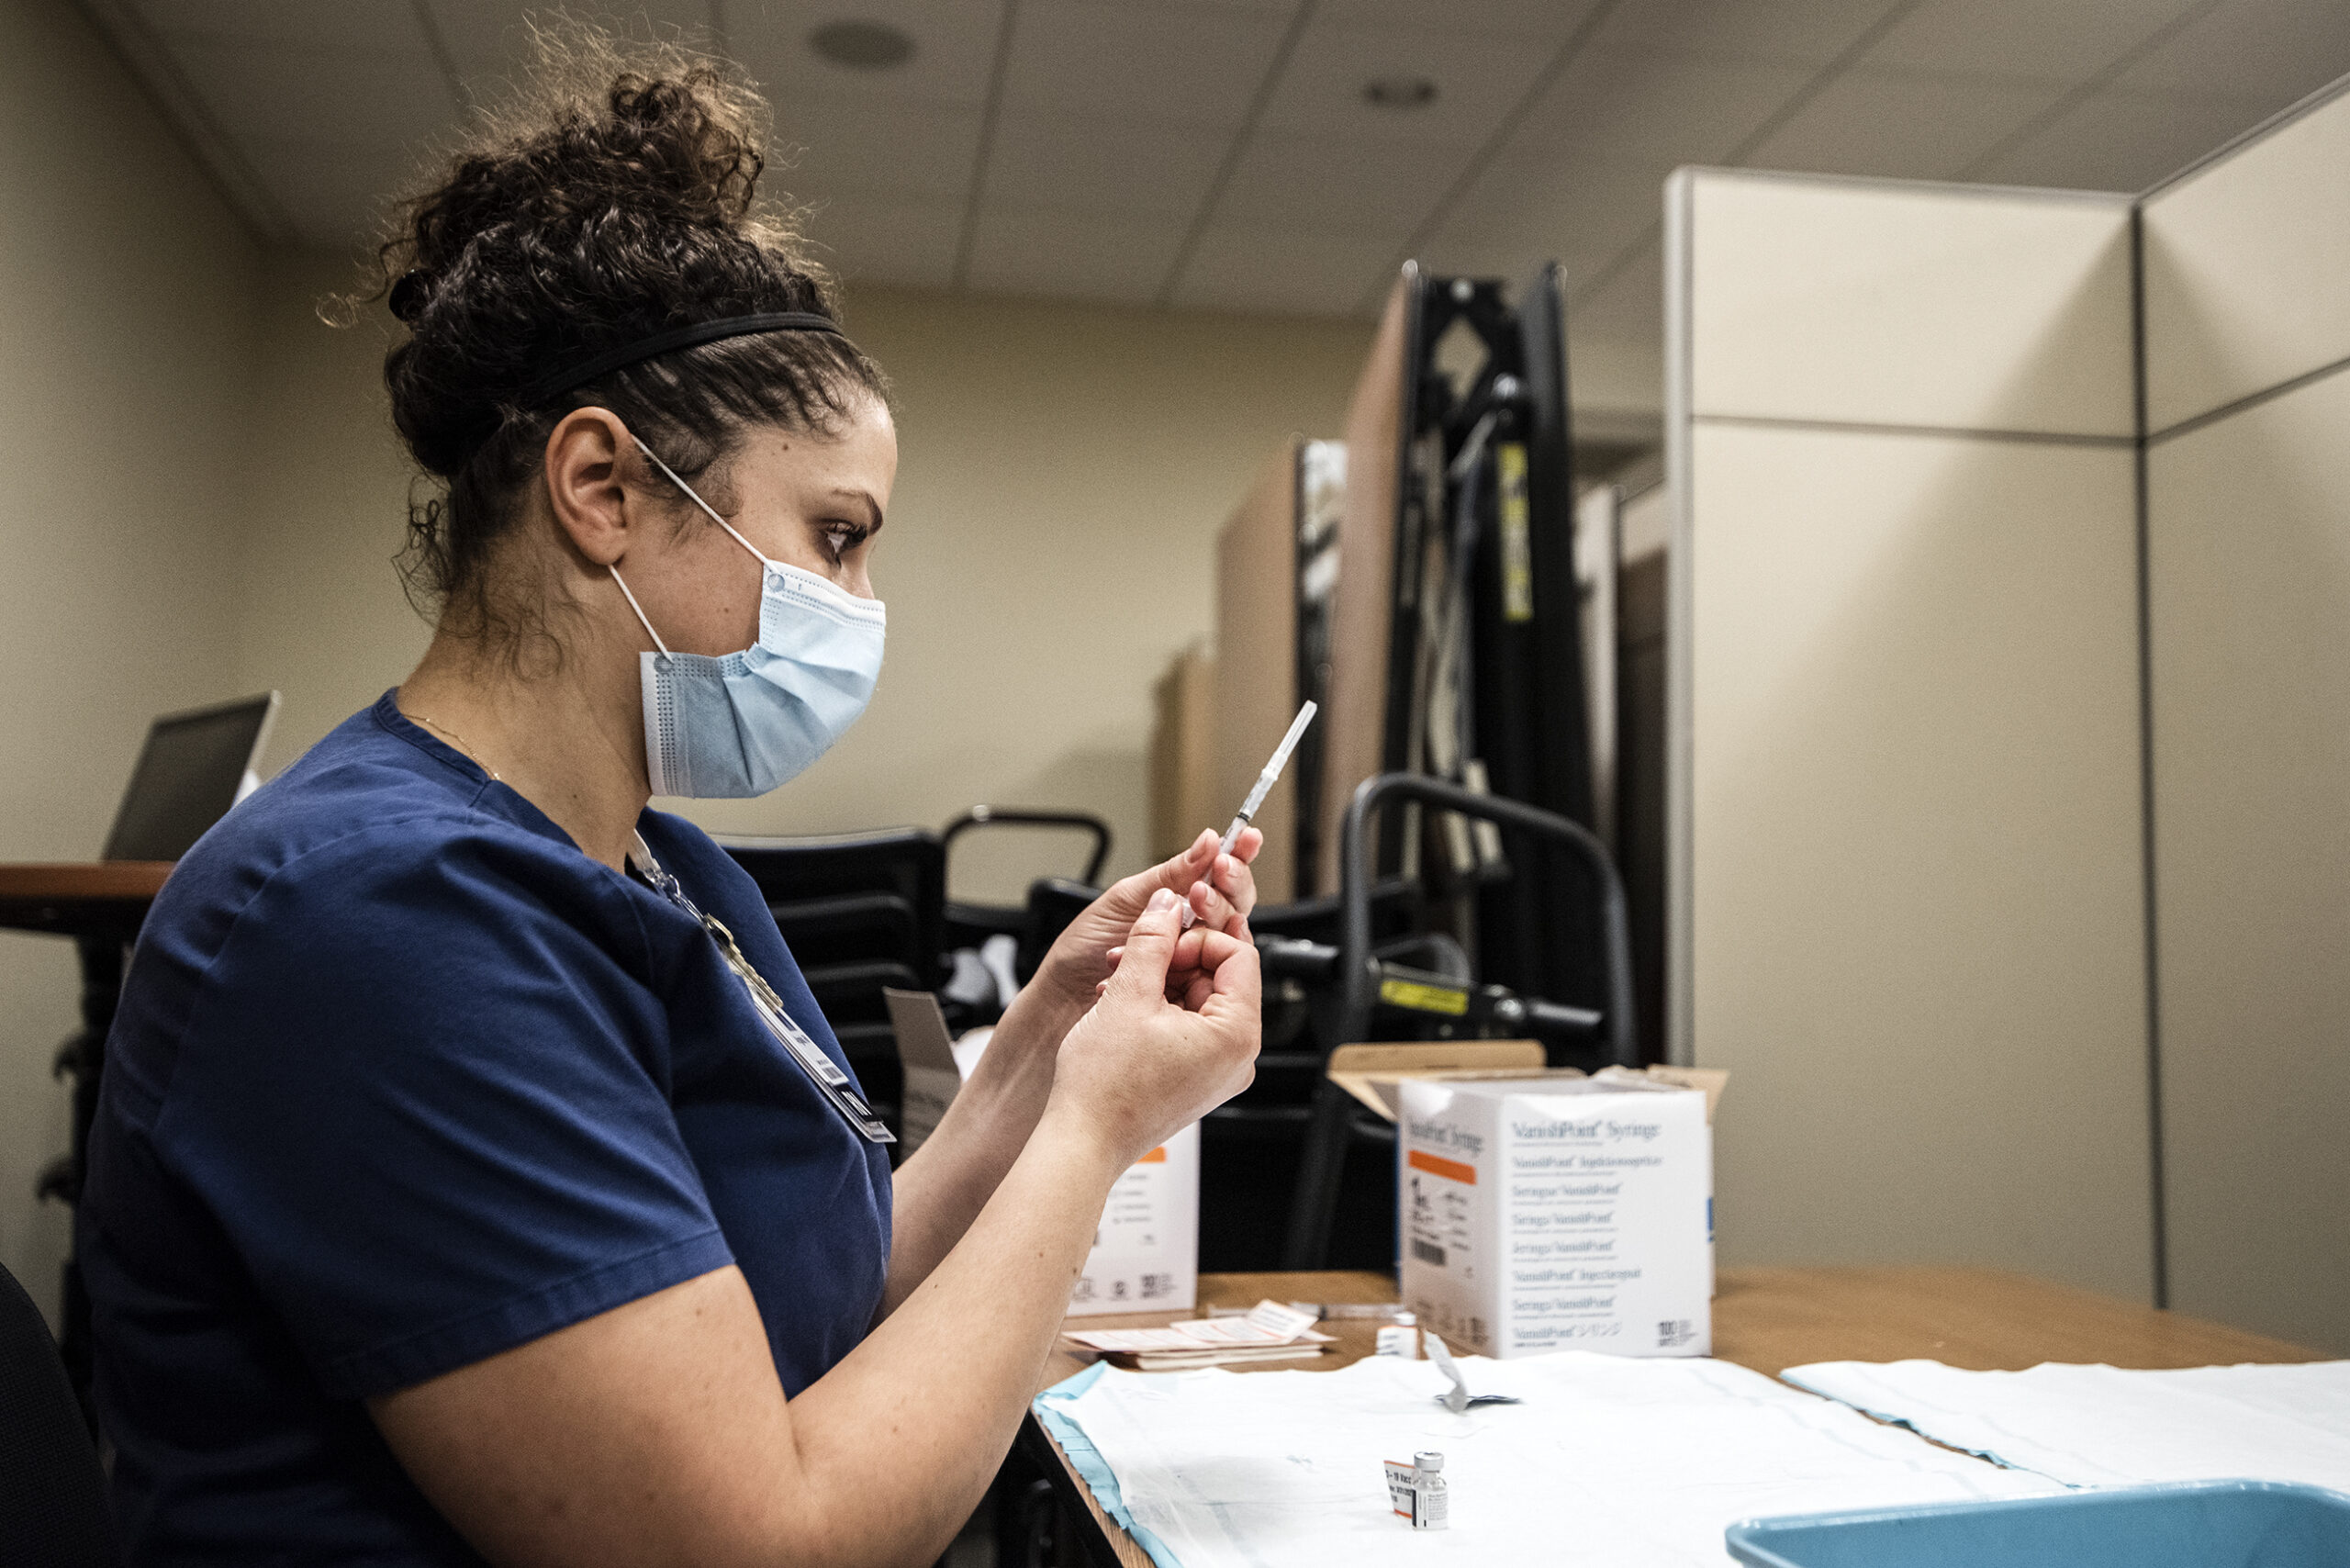 A healthcare worker pushes the vaccine into a syringe